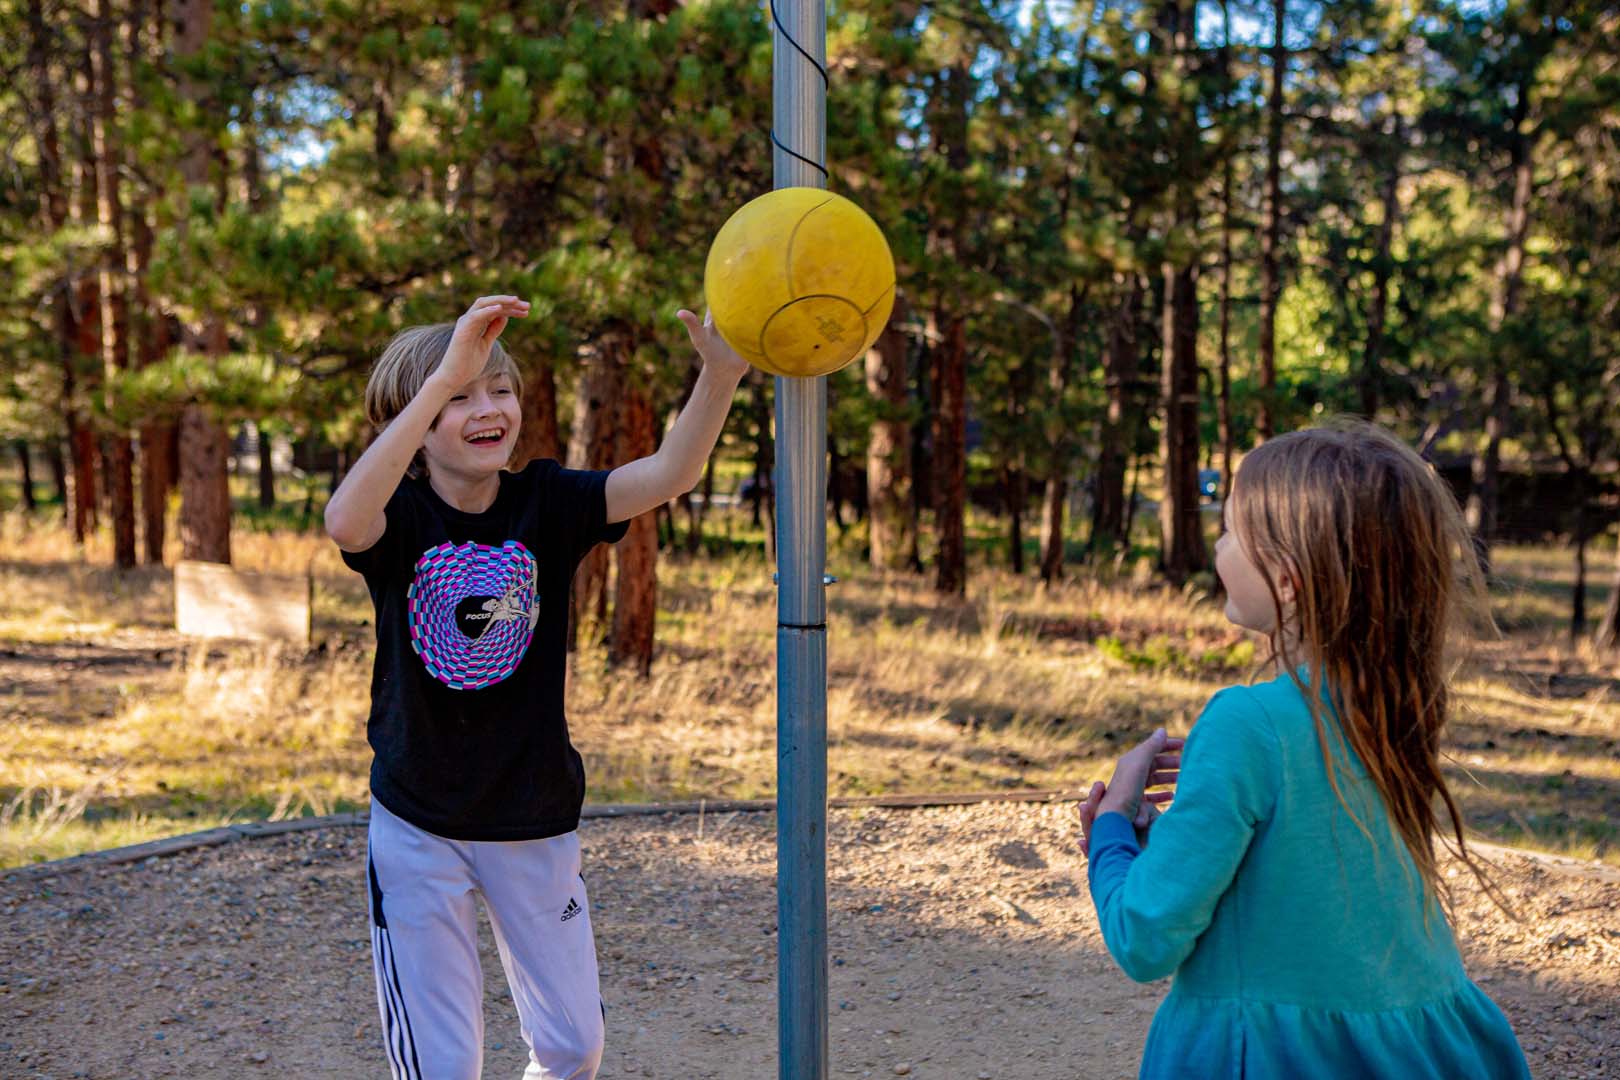 kids playing outside with a ball